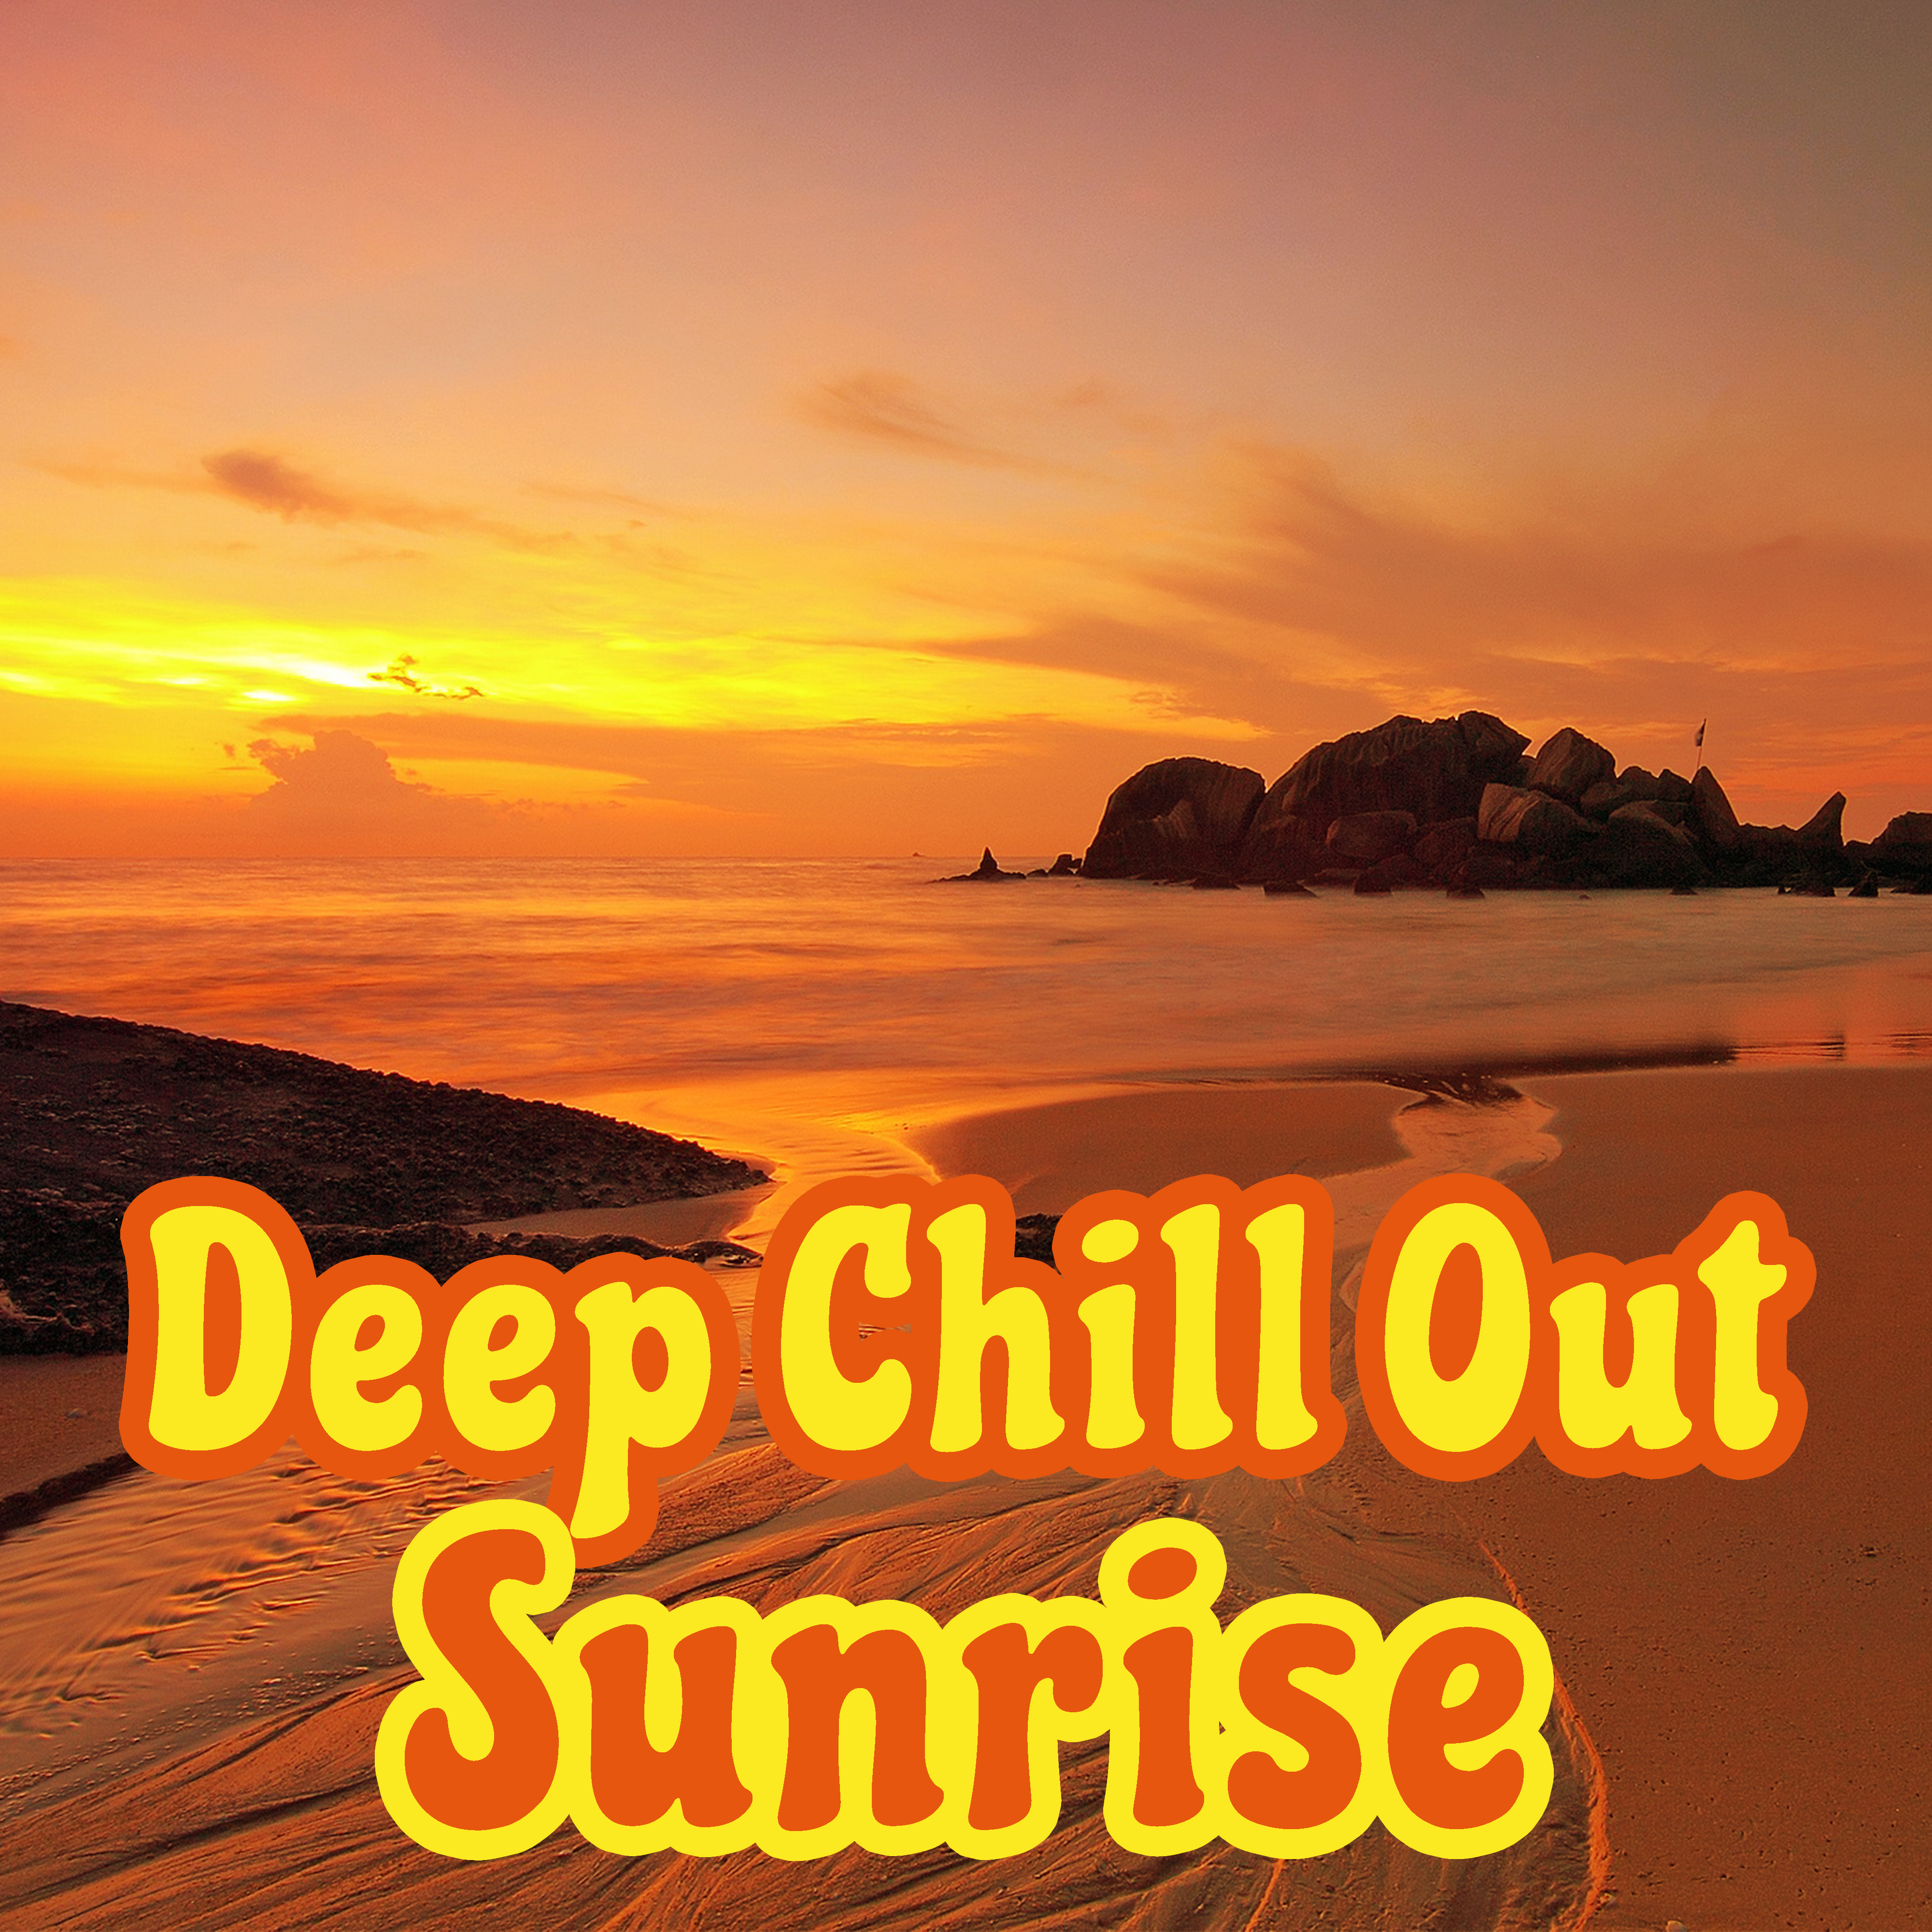 Deep Chill Out Sunrise – Sunbed Chill, Deep Relaxation, Chill Out Memories, Summer 2017